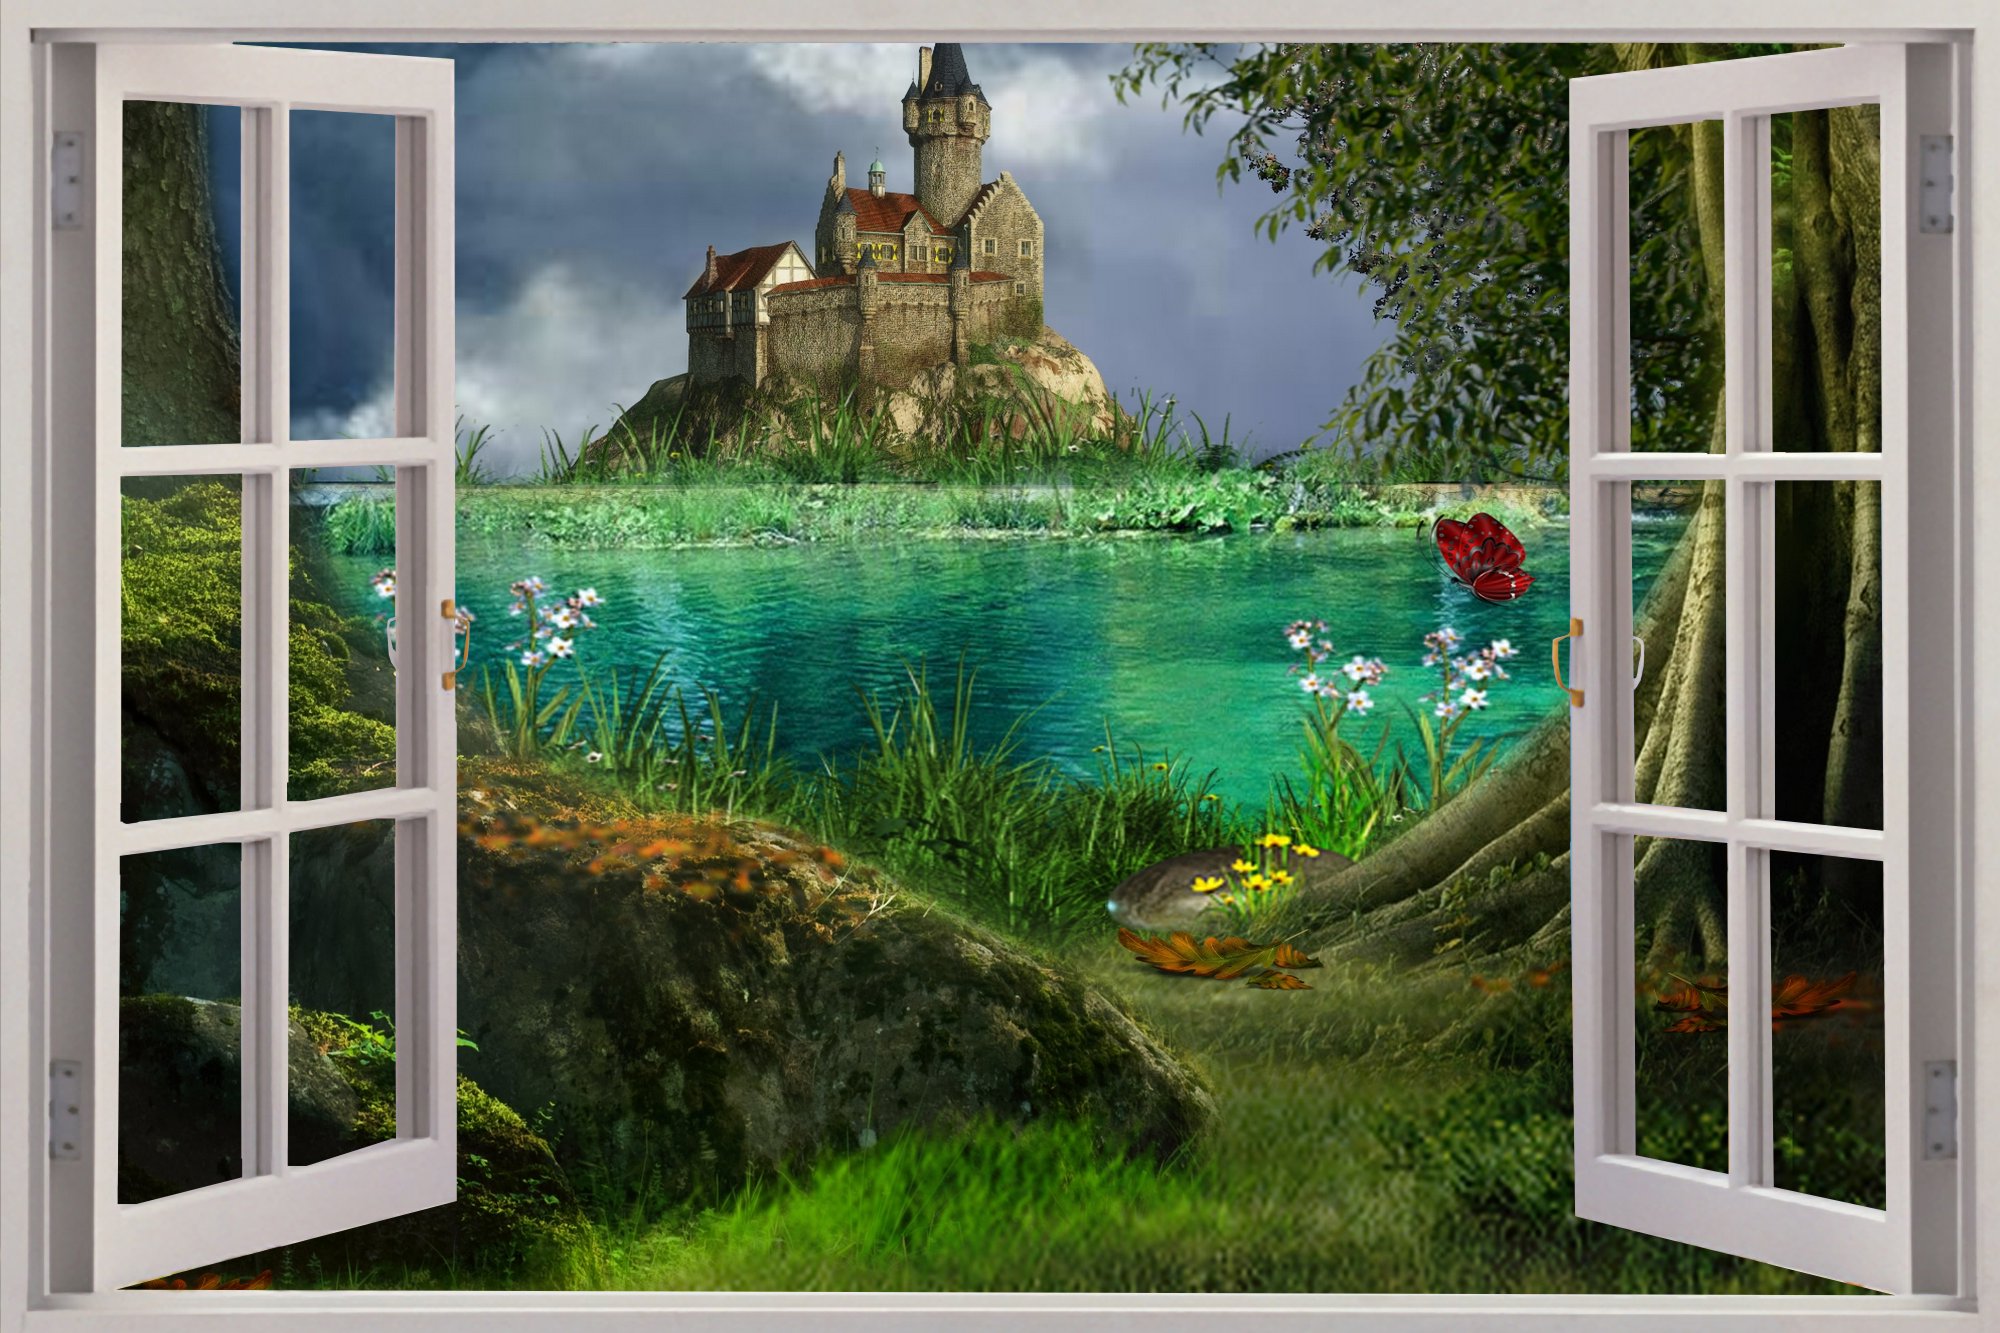  Window Enchanted Castle View Wall Stickers Mural Art Decal Wallpaper